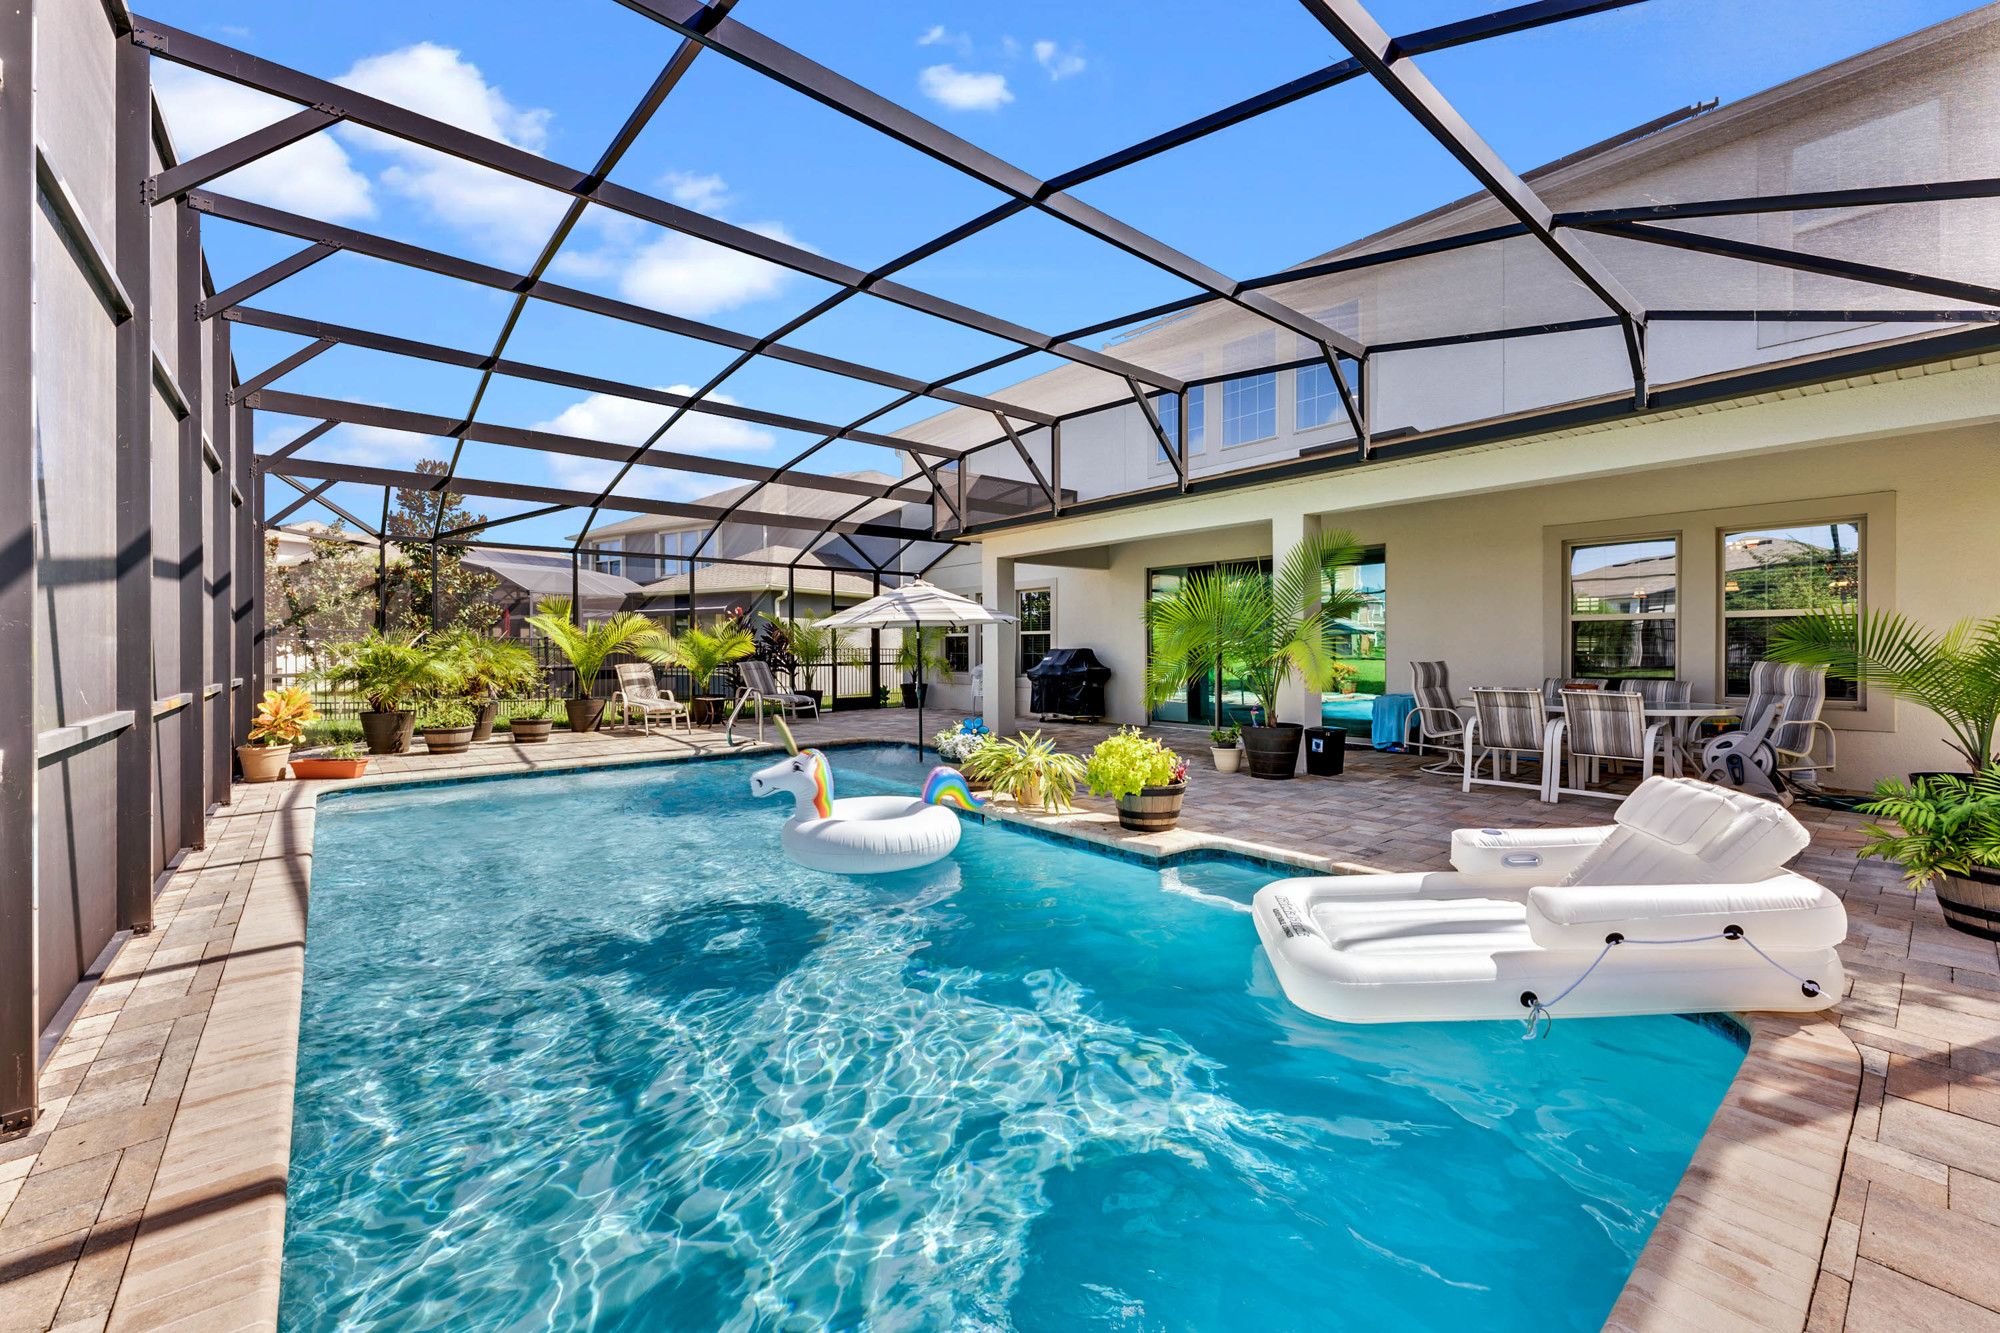 This 4,290-square-foot home at 13924 Jomatt Loop, Winter Garden, was listed Sept. 10, for $589,900. It has four bedrooms, three-and-one-half baths and a pool. (Photo by DeVore Design for Clock Tower Realty)